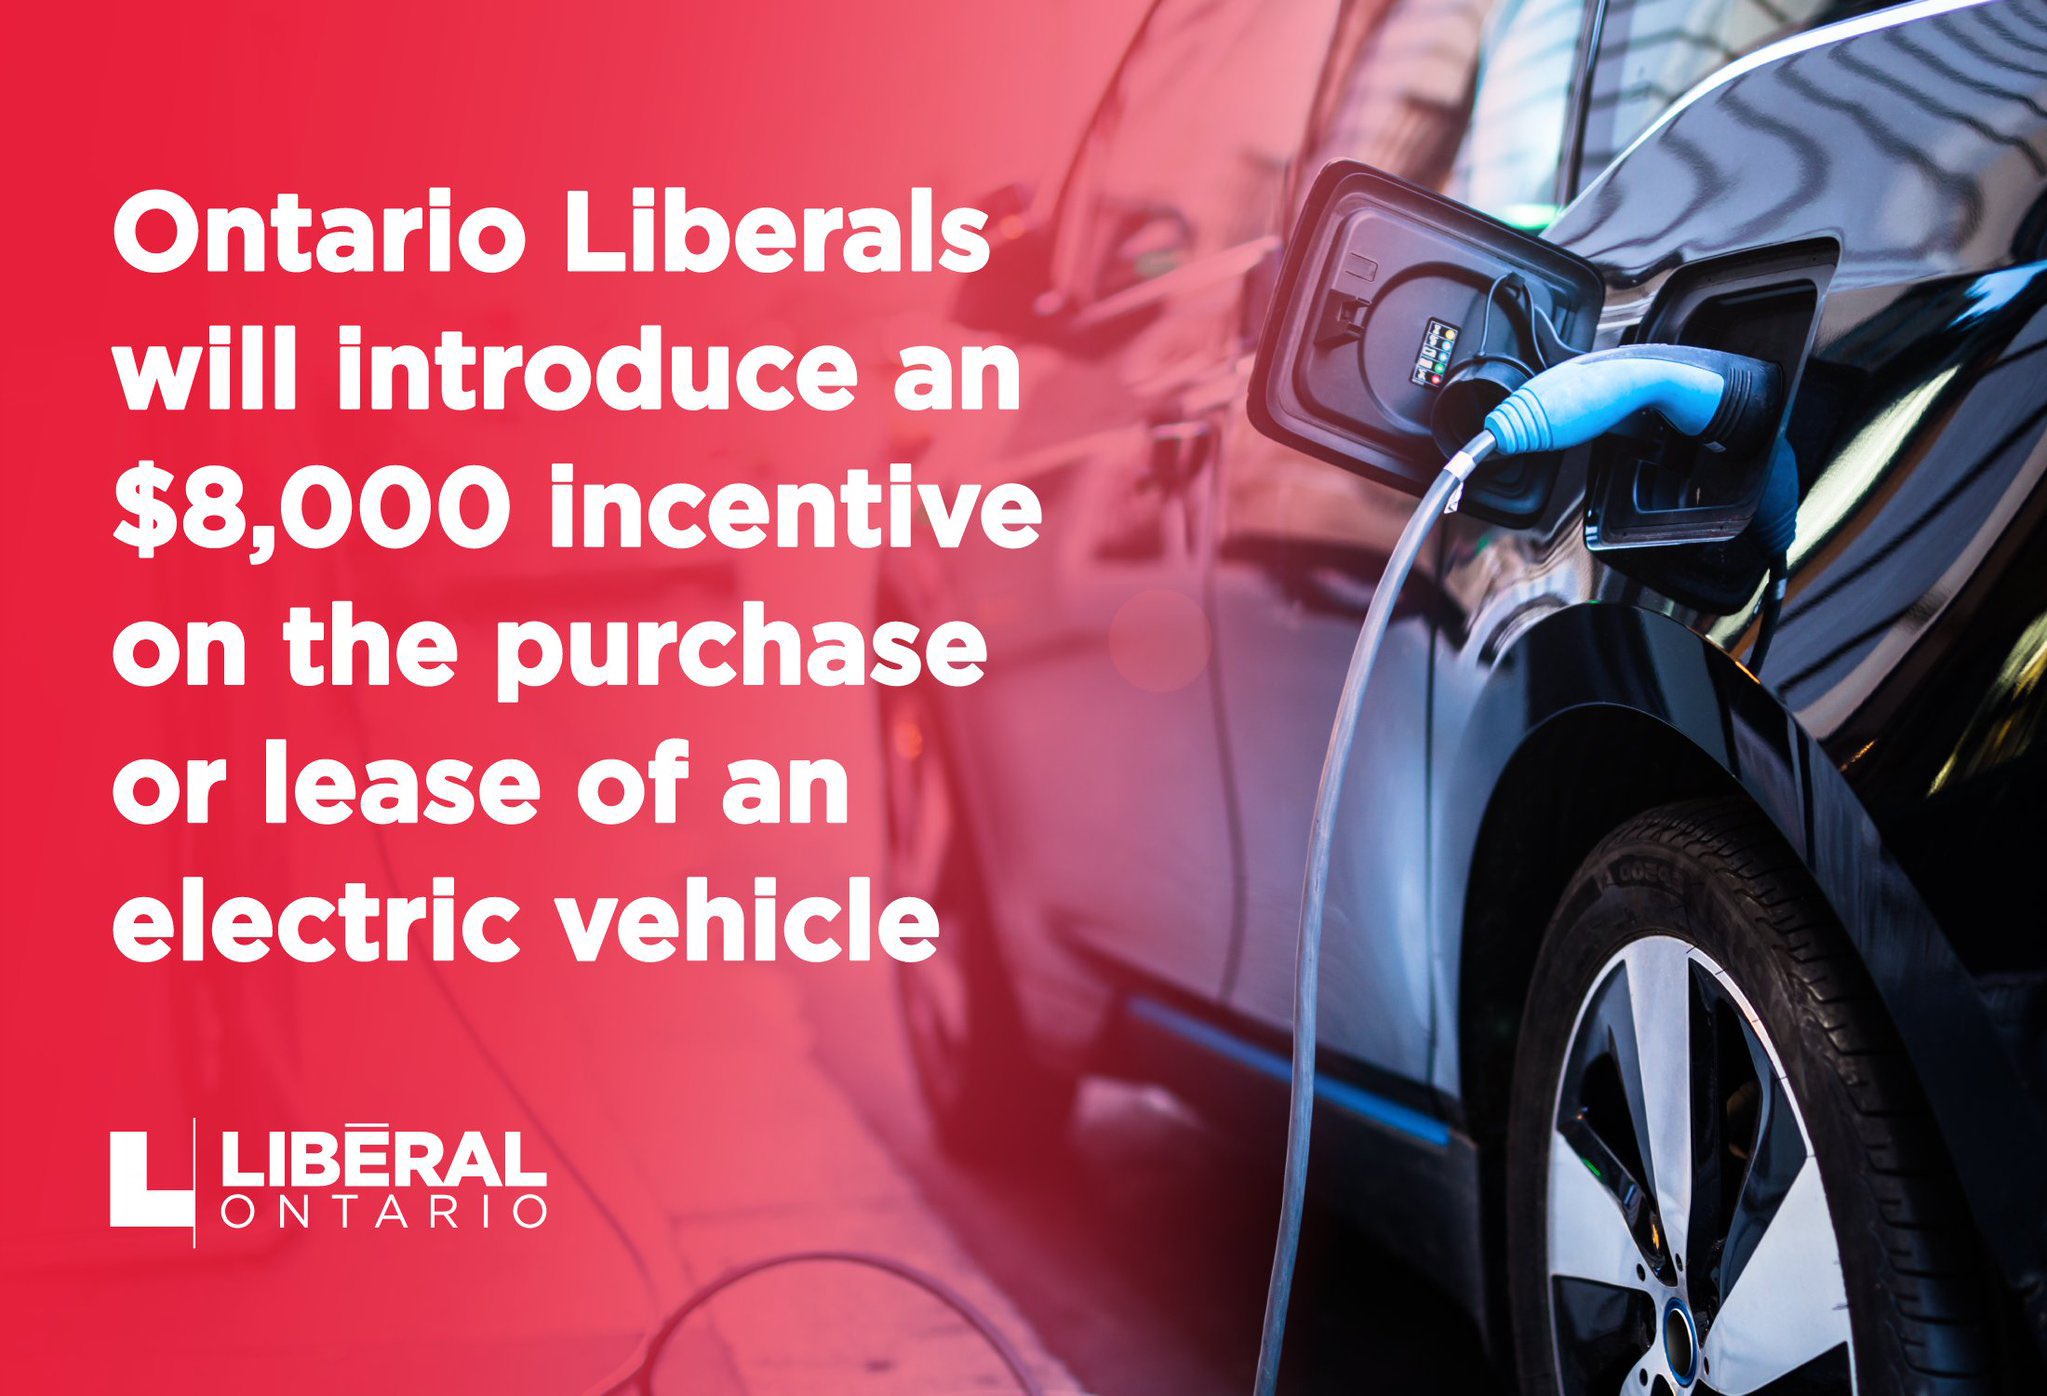 Ontario Liberals propose up to 9,500 in EV related incentives if